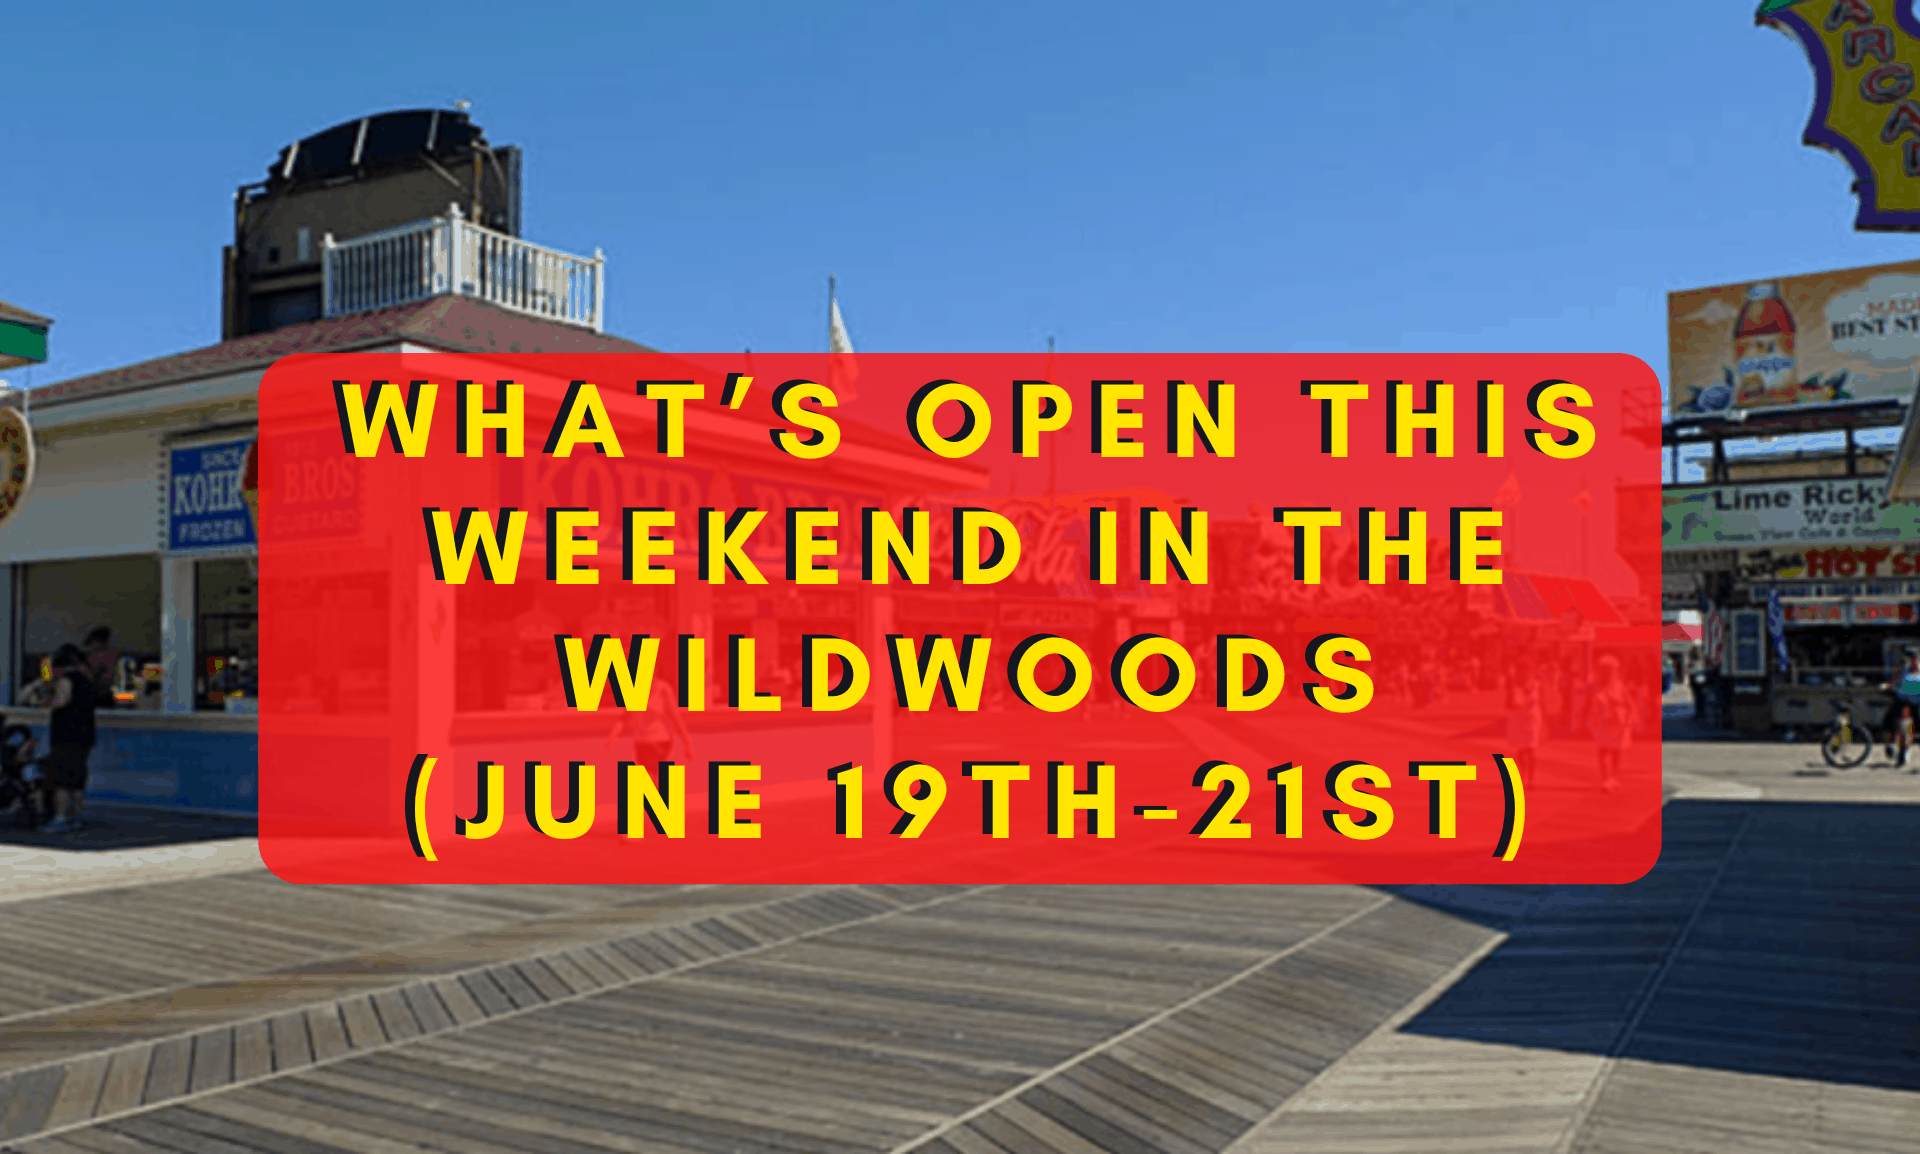 What’s Open This Weekend In The Wildwoods (June 19th-June 21st)